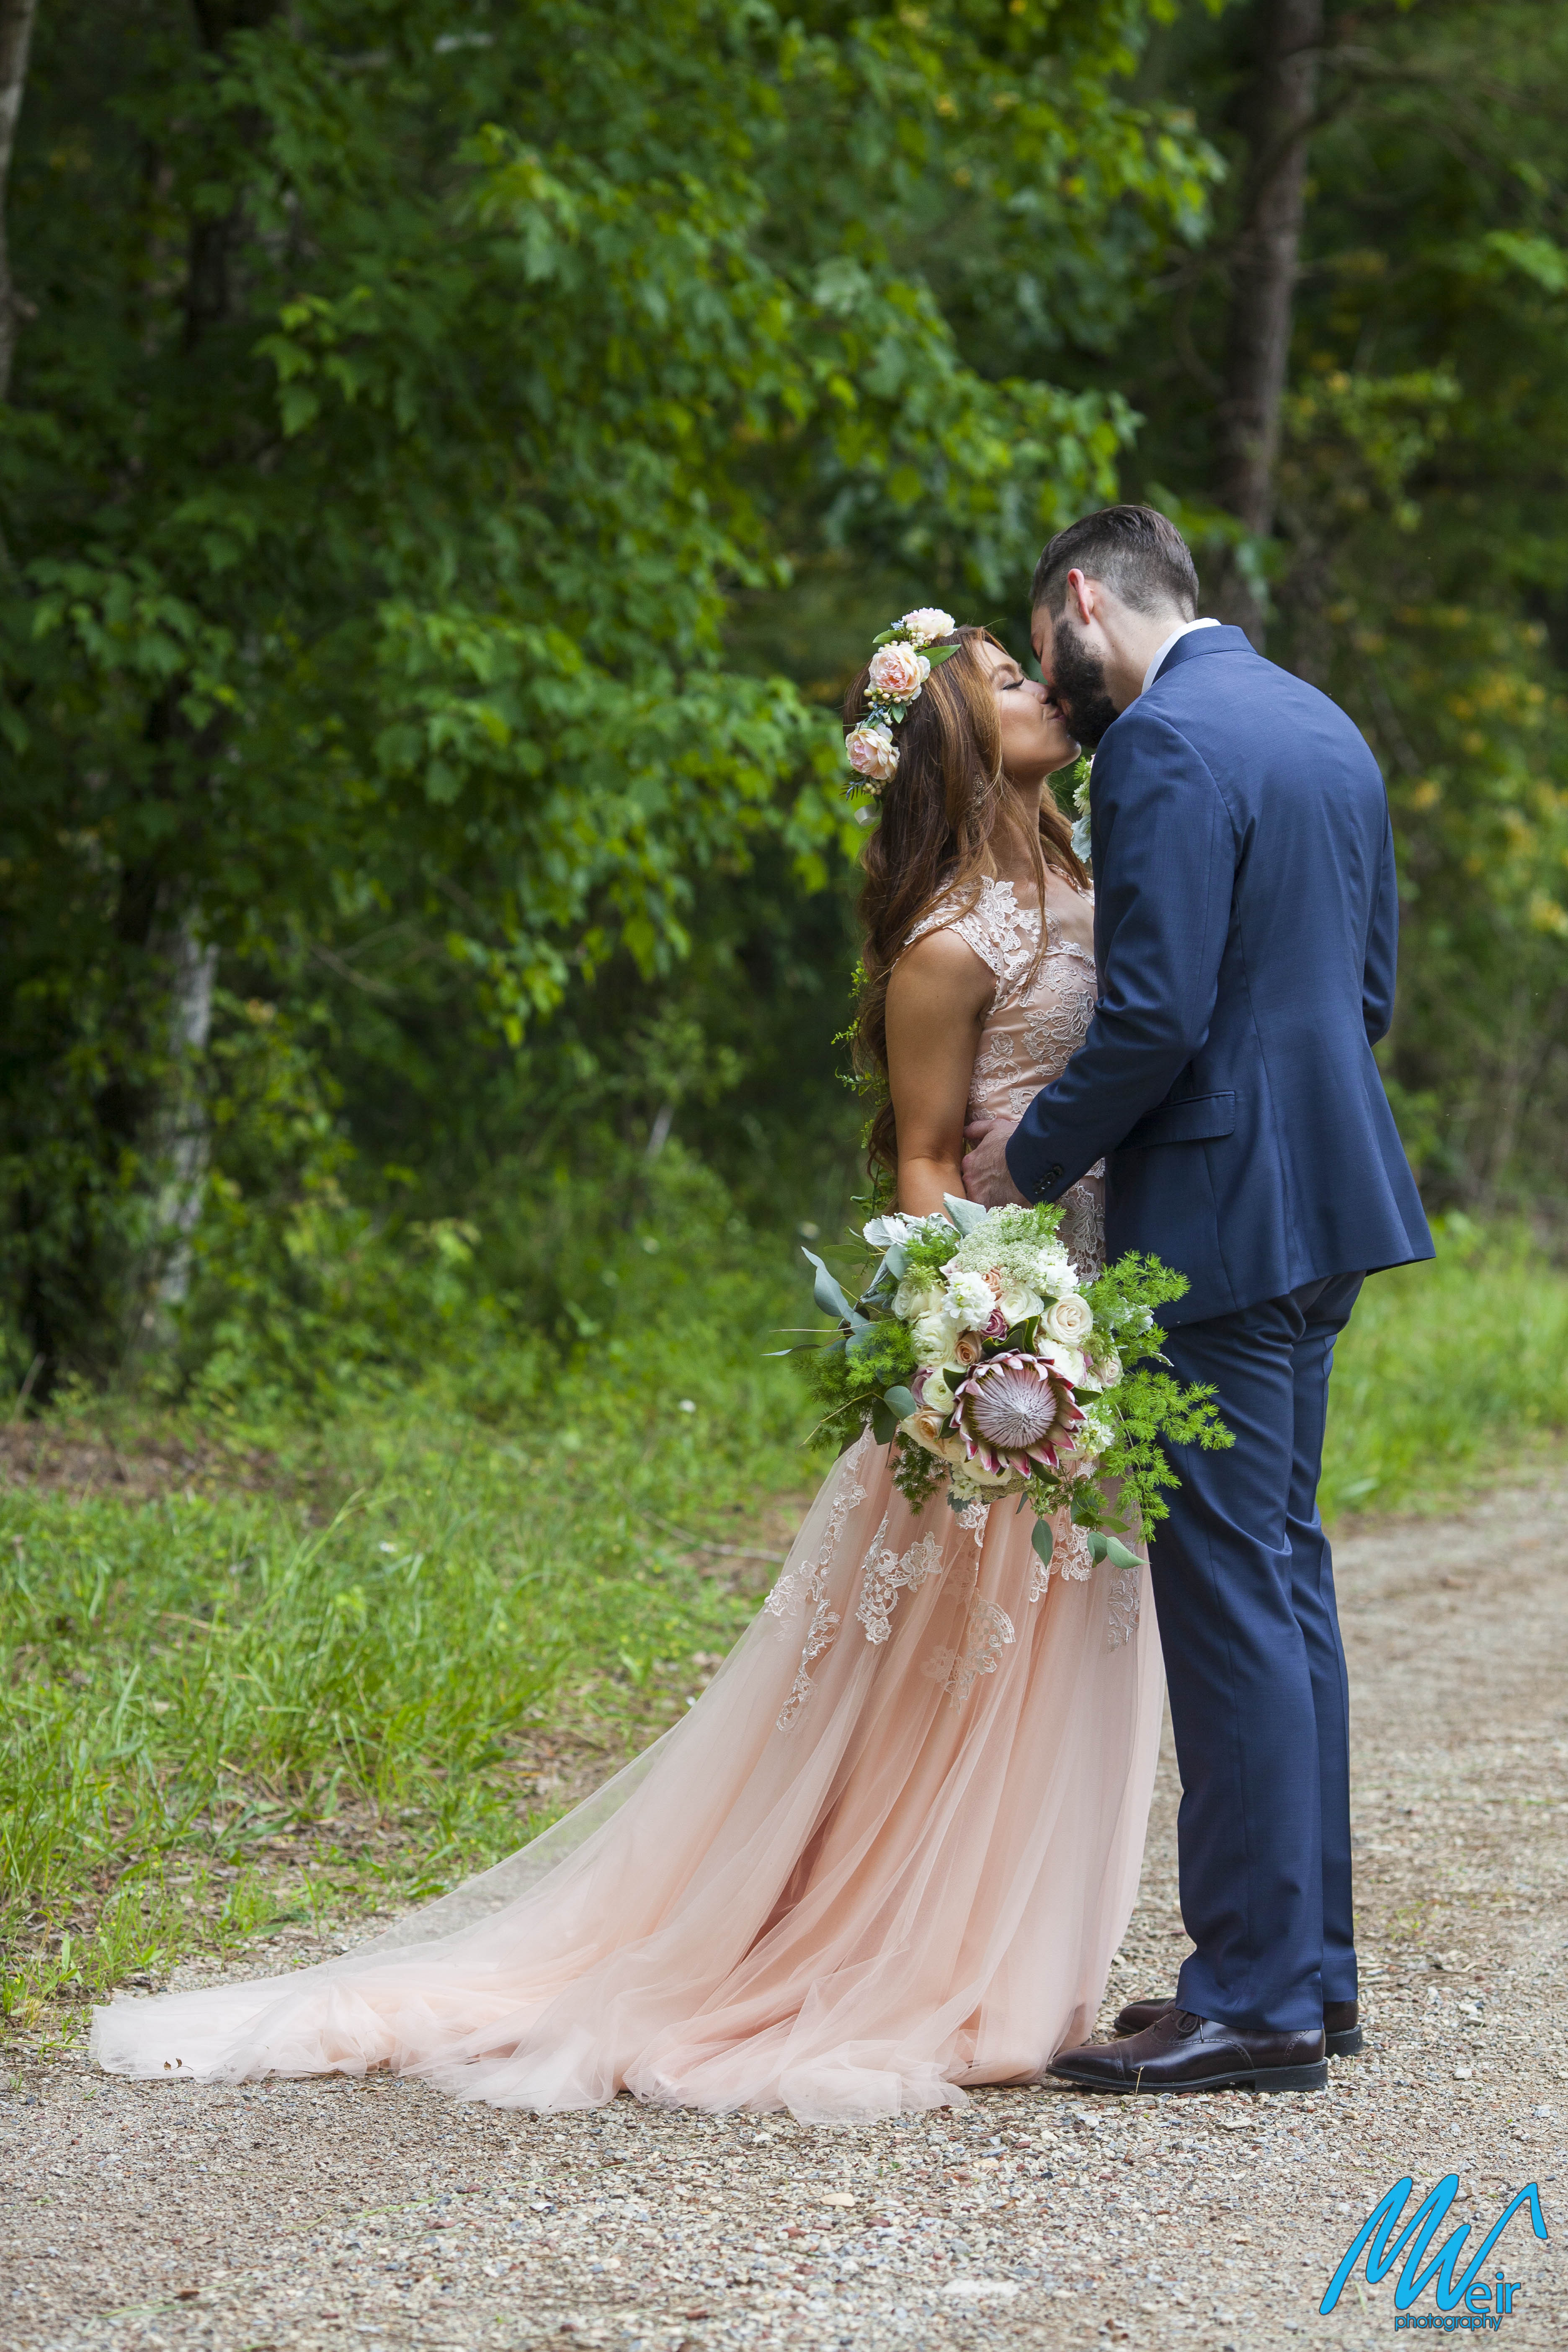 bride and groom kiss on a dirt road